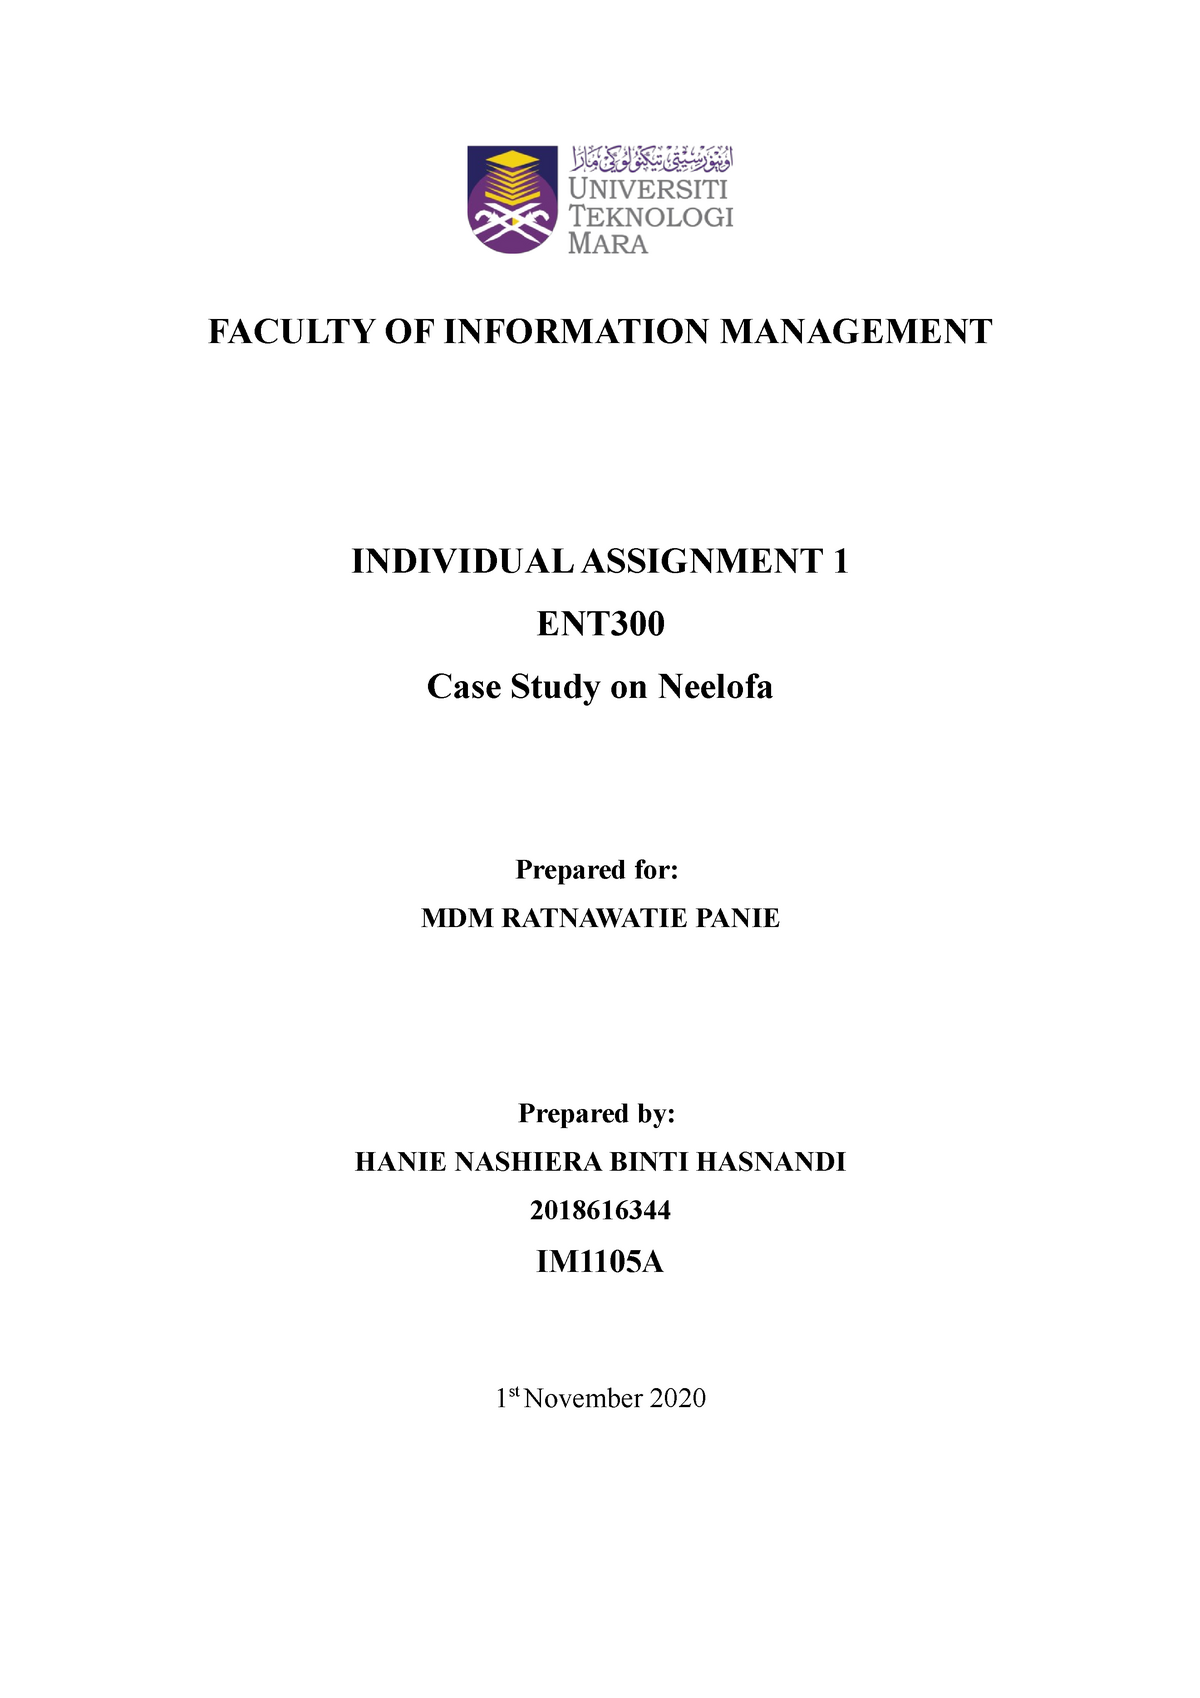 ENT 300 case study - Individual assignments - FACULTY OF INFORMATION